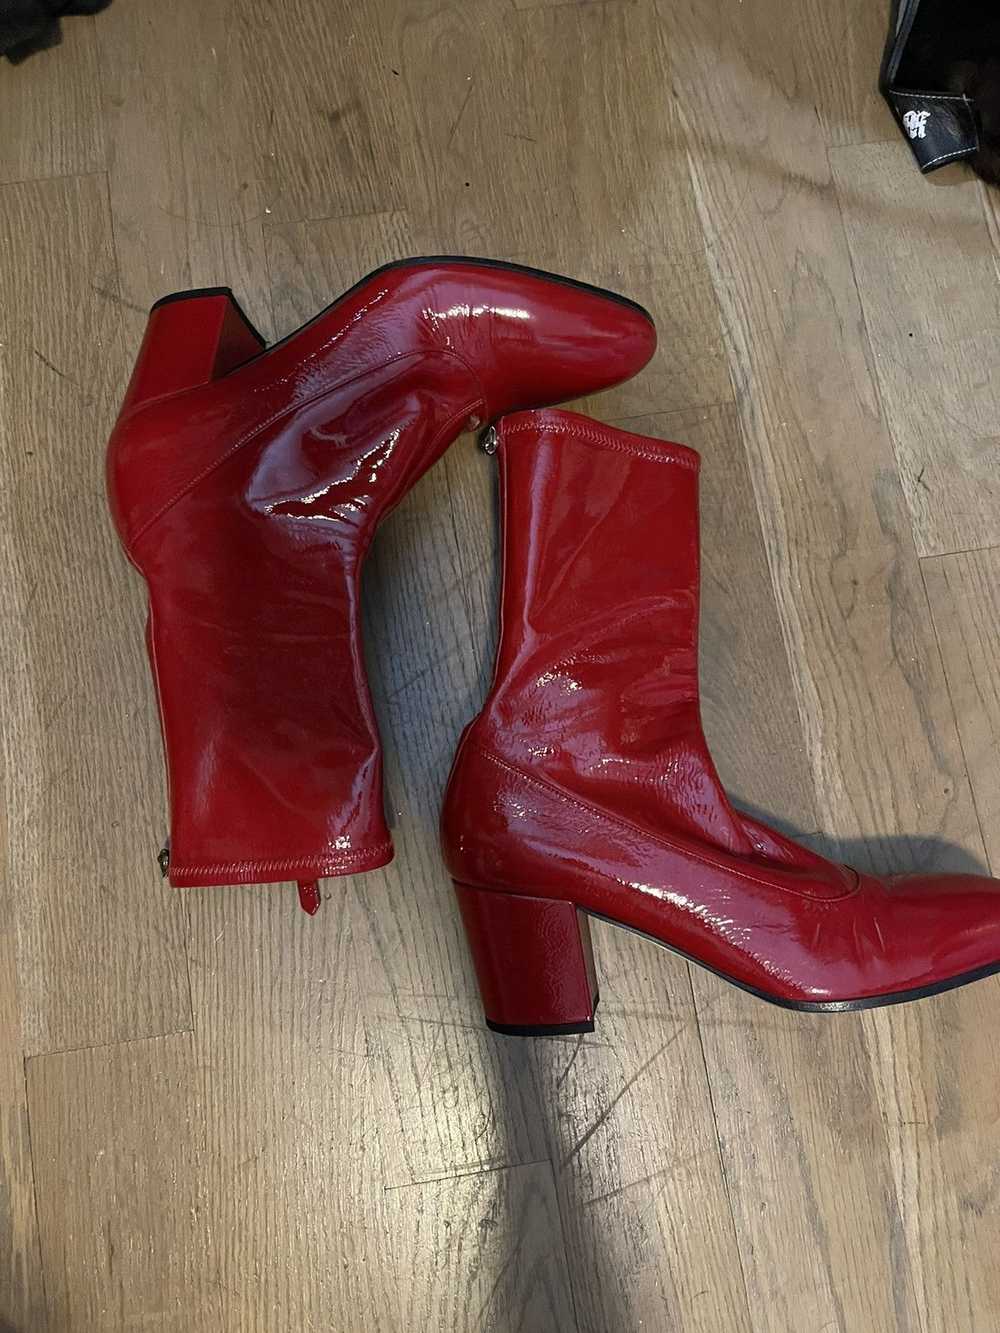 Gucci Gucci cruise red patent men heels - image 3